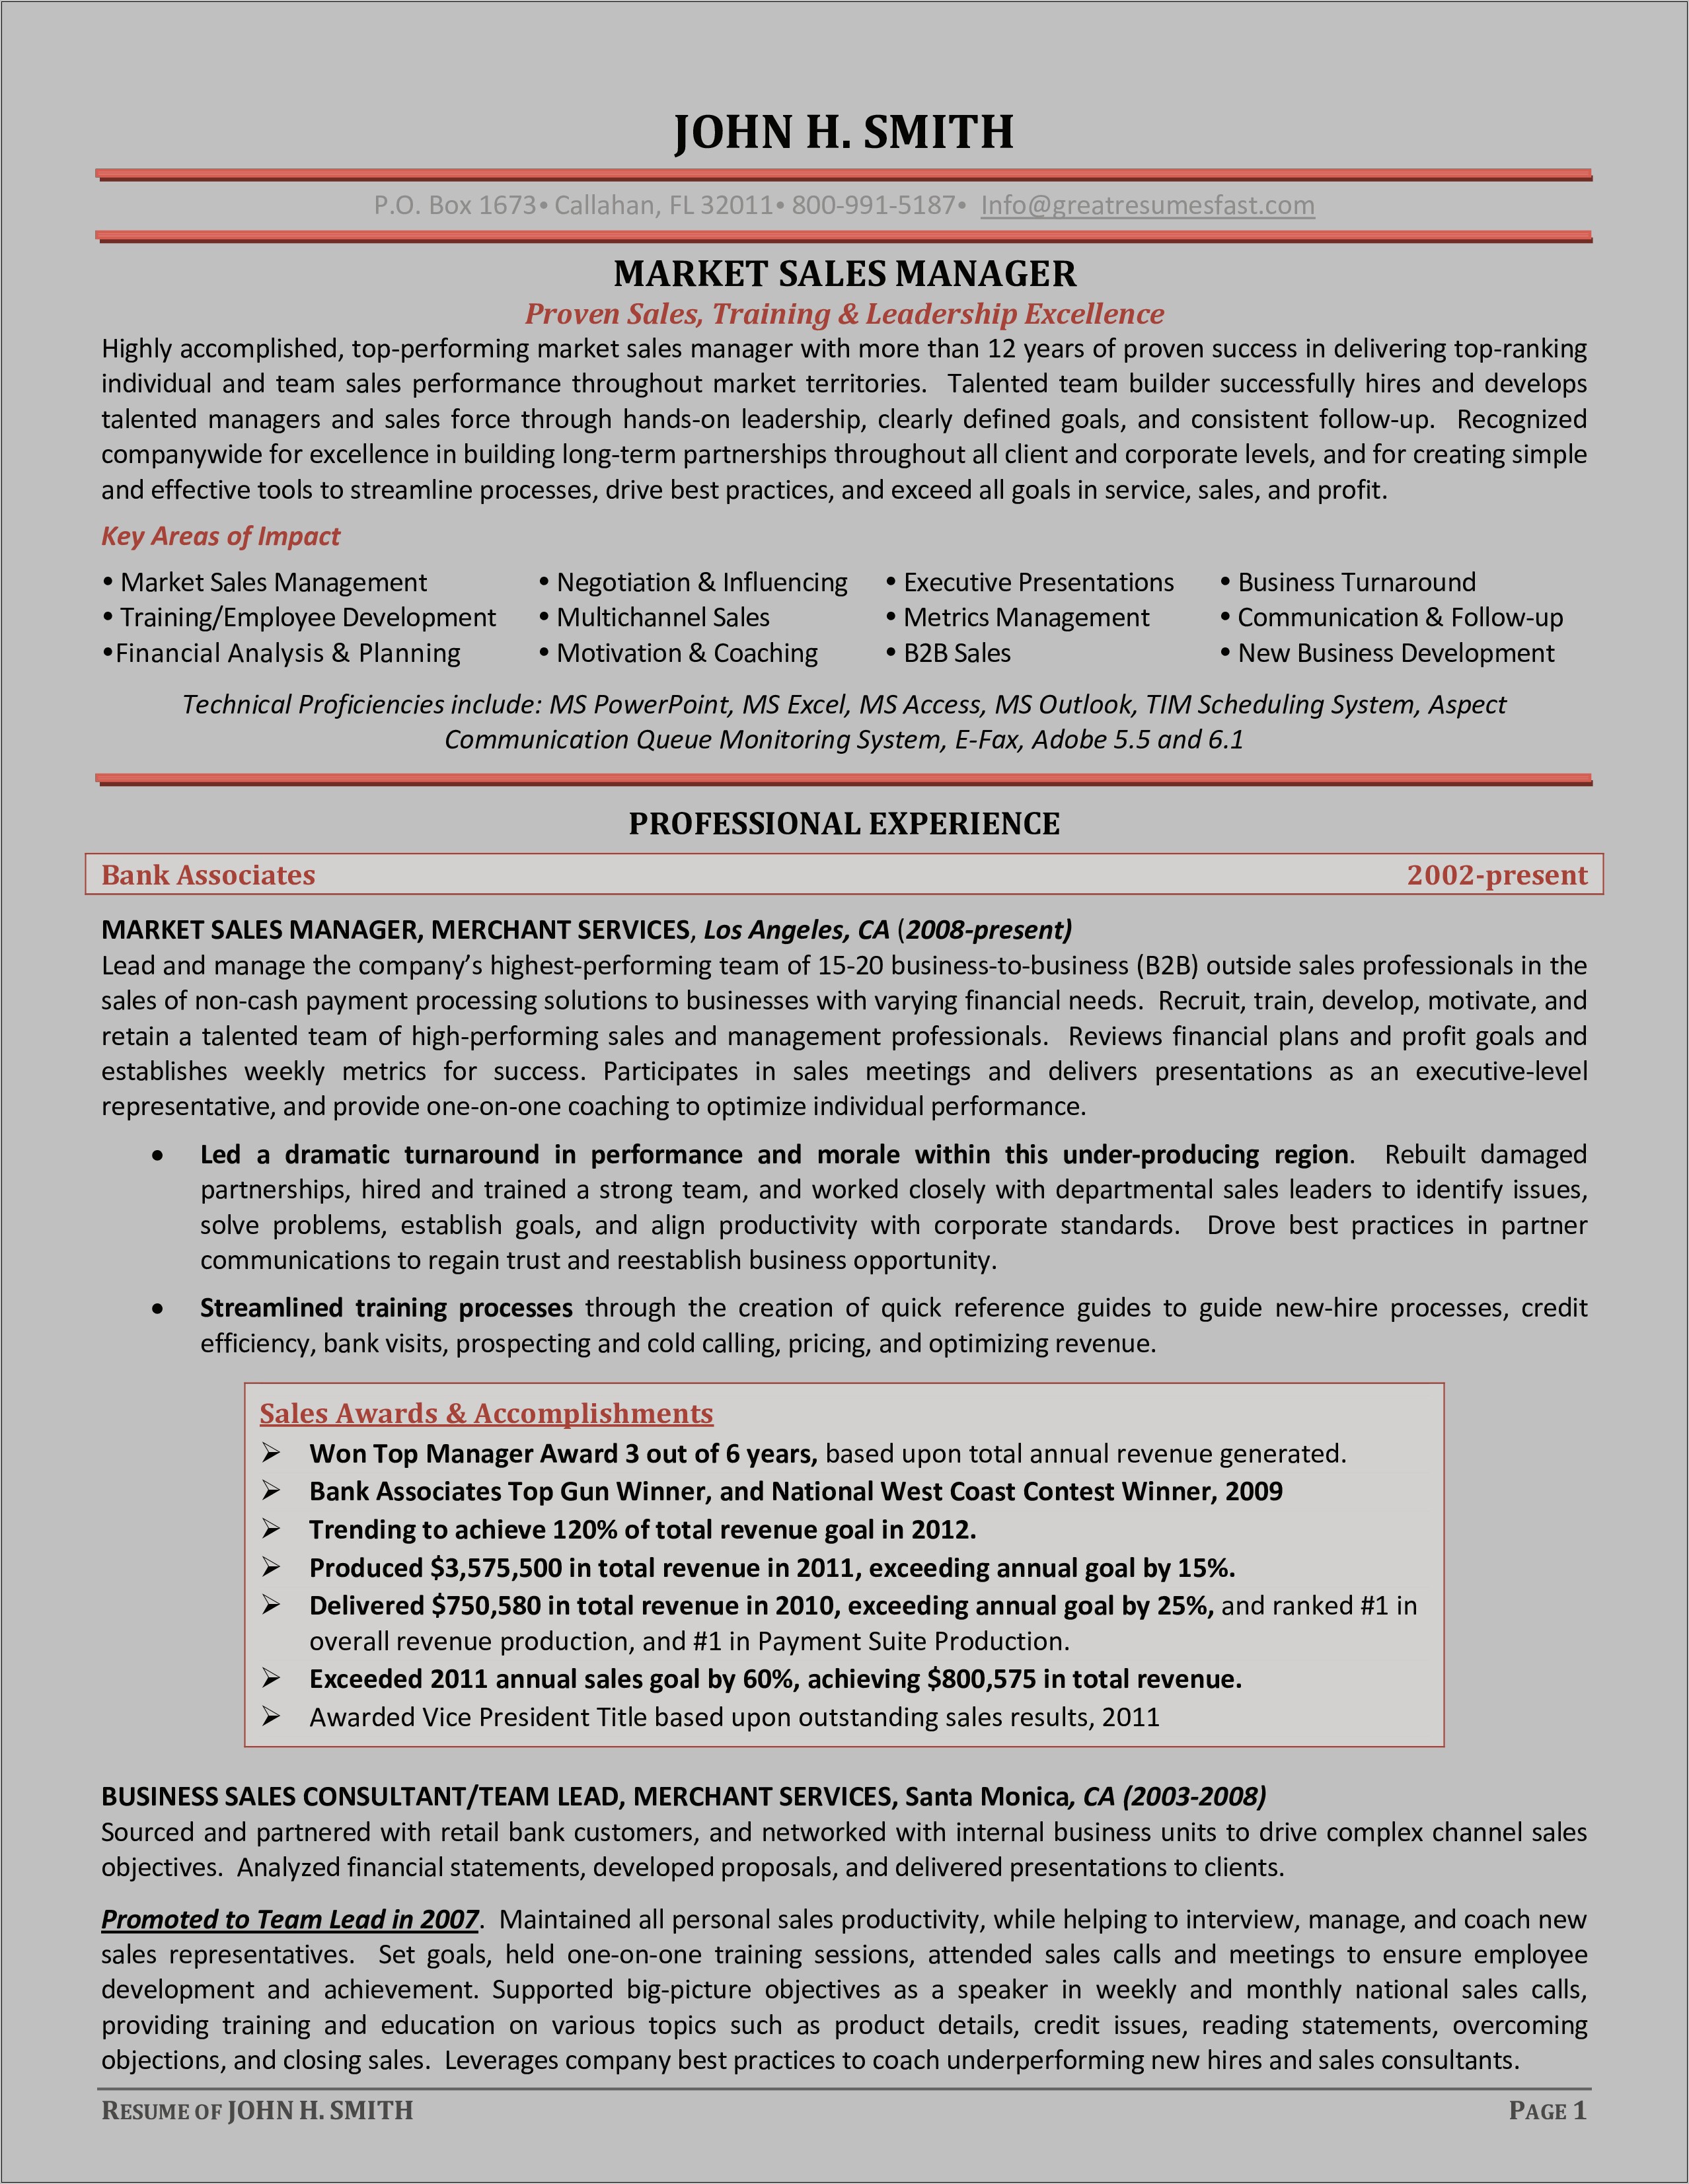 Sample Resume Format For Experienced Sales Executive